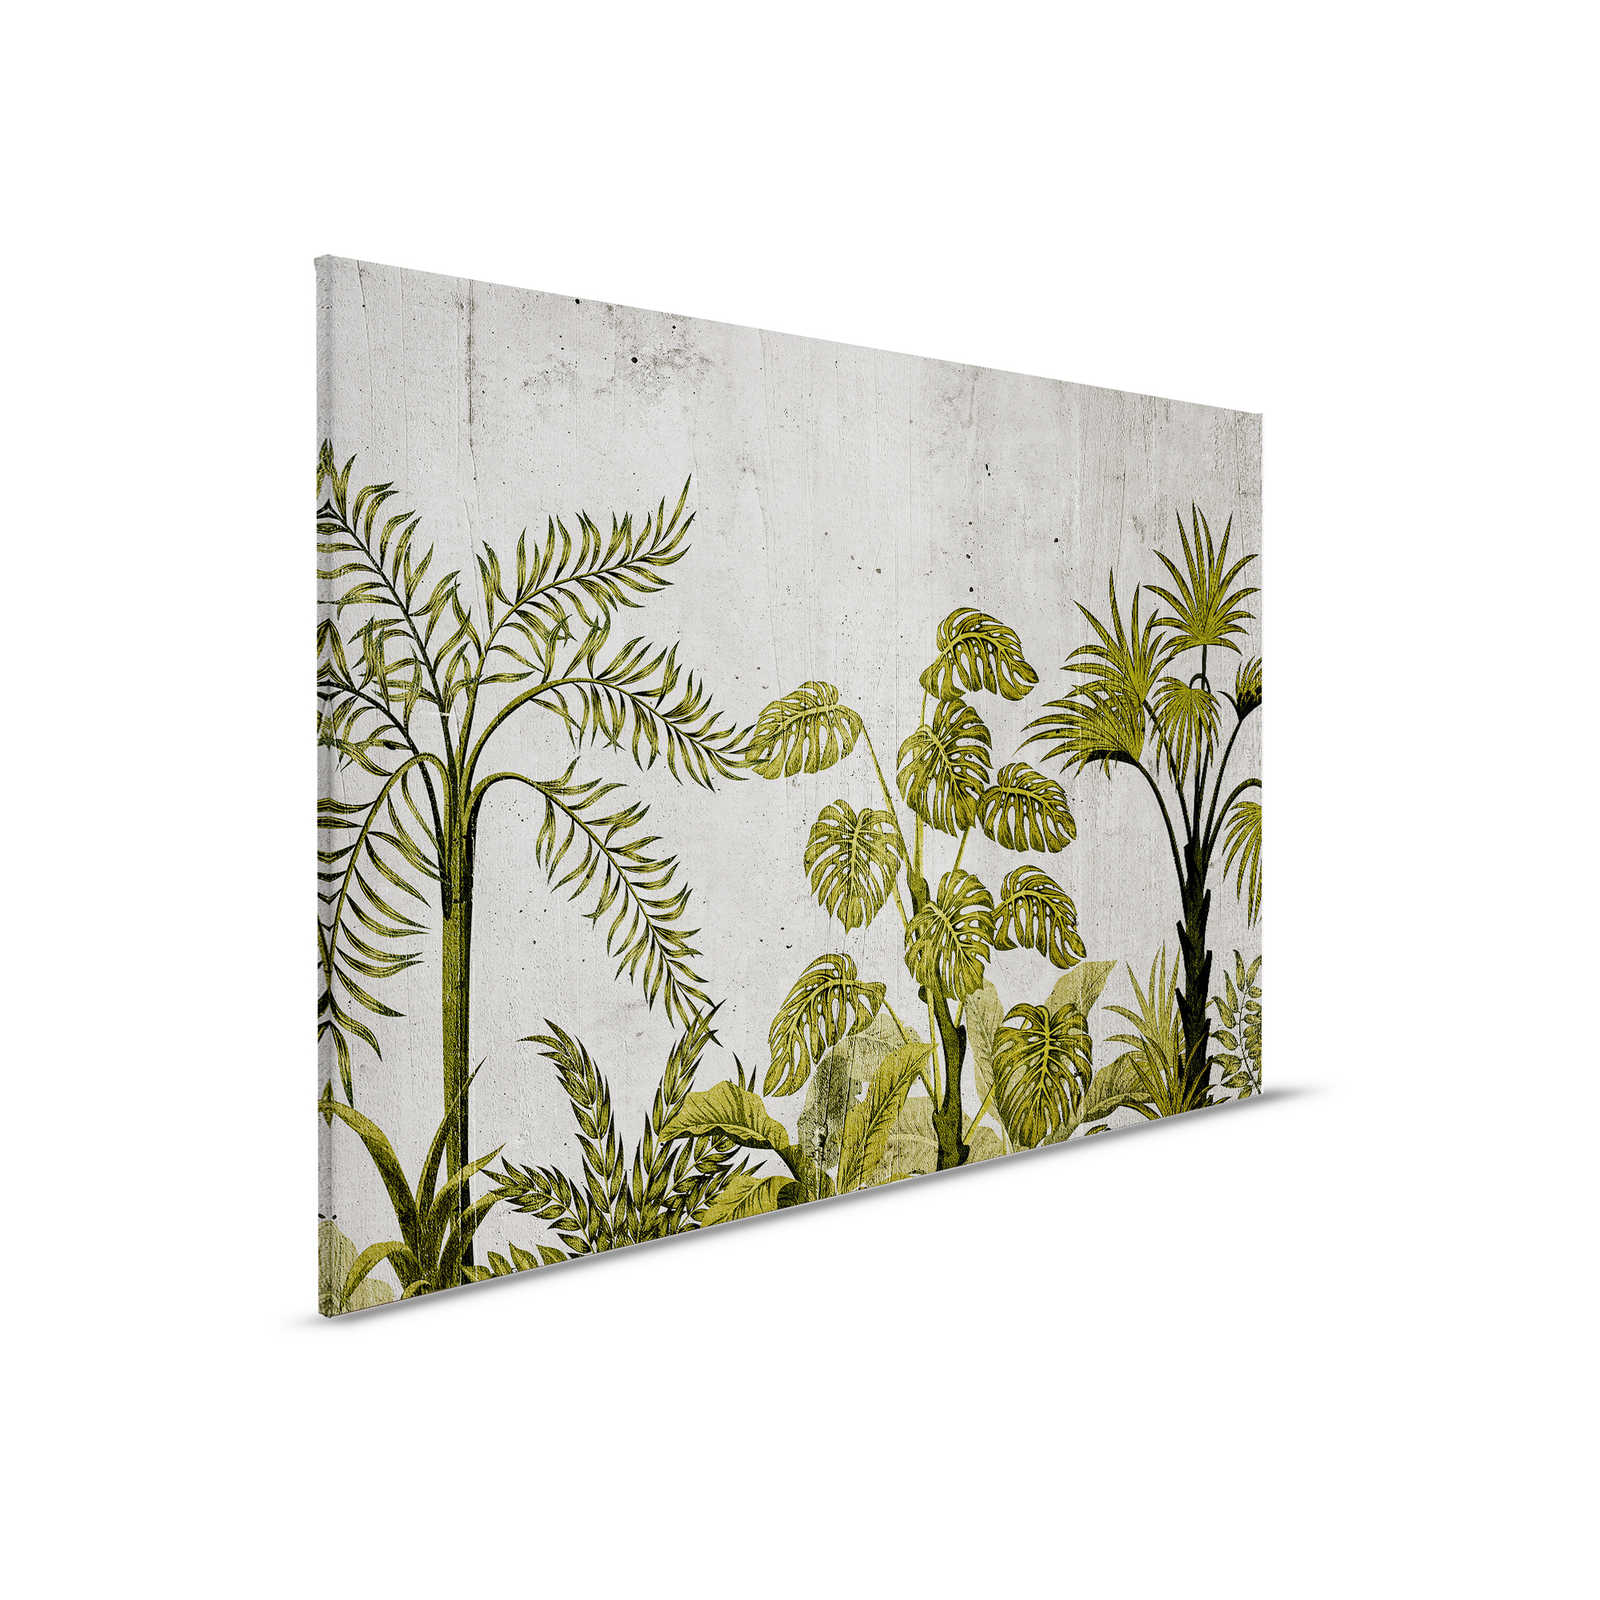 Canvas painting with jungle motif on concrete background - 0.90 m x 0.60 m
